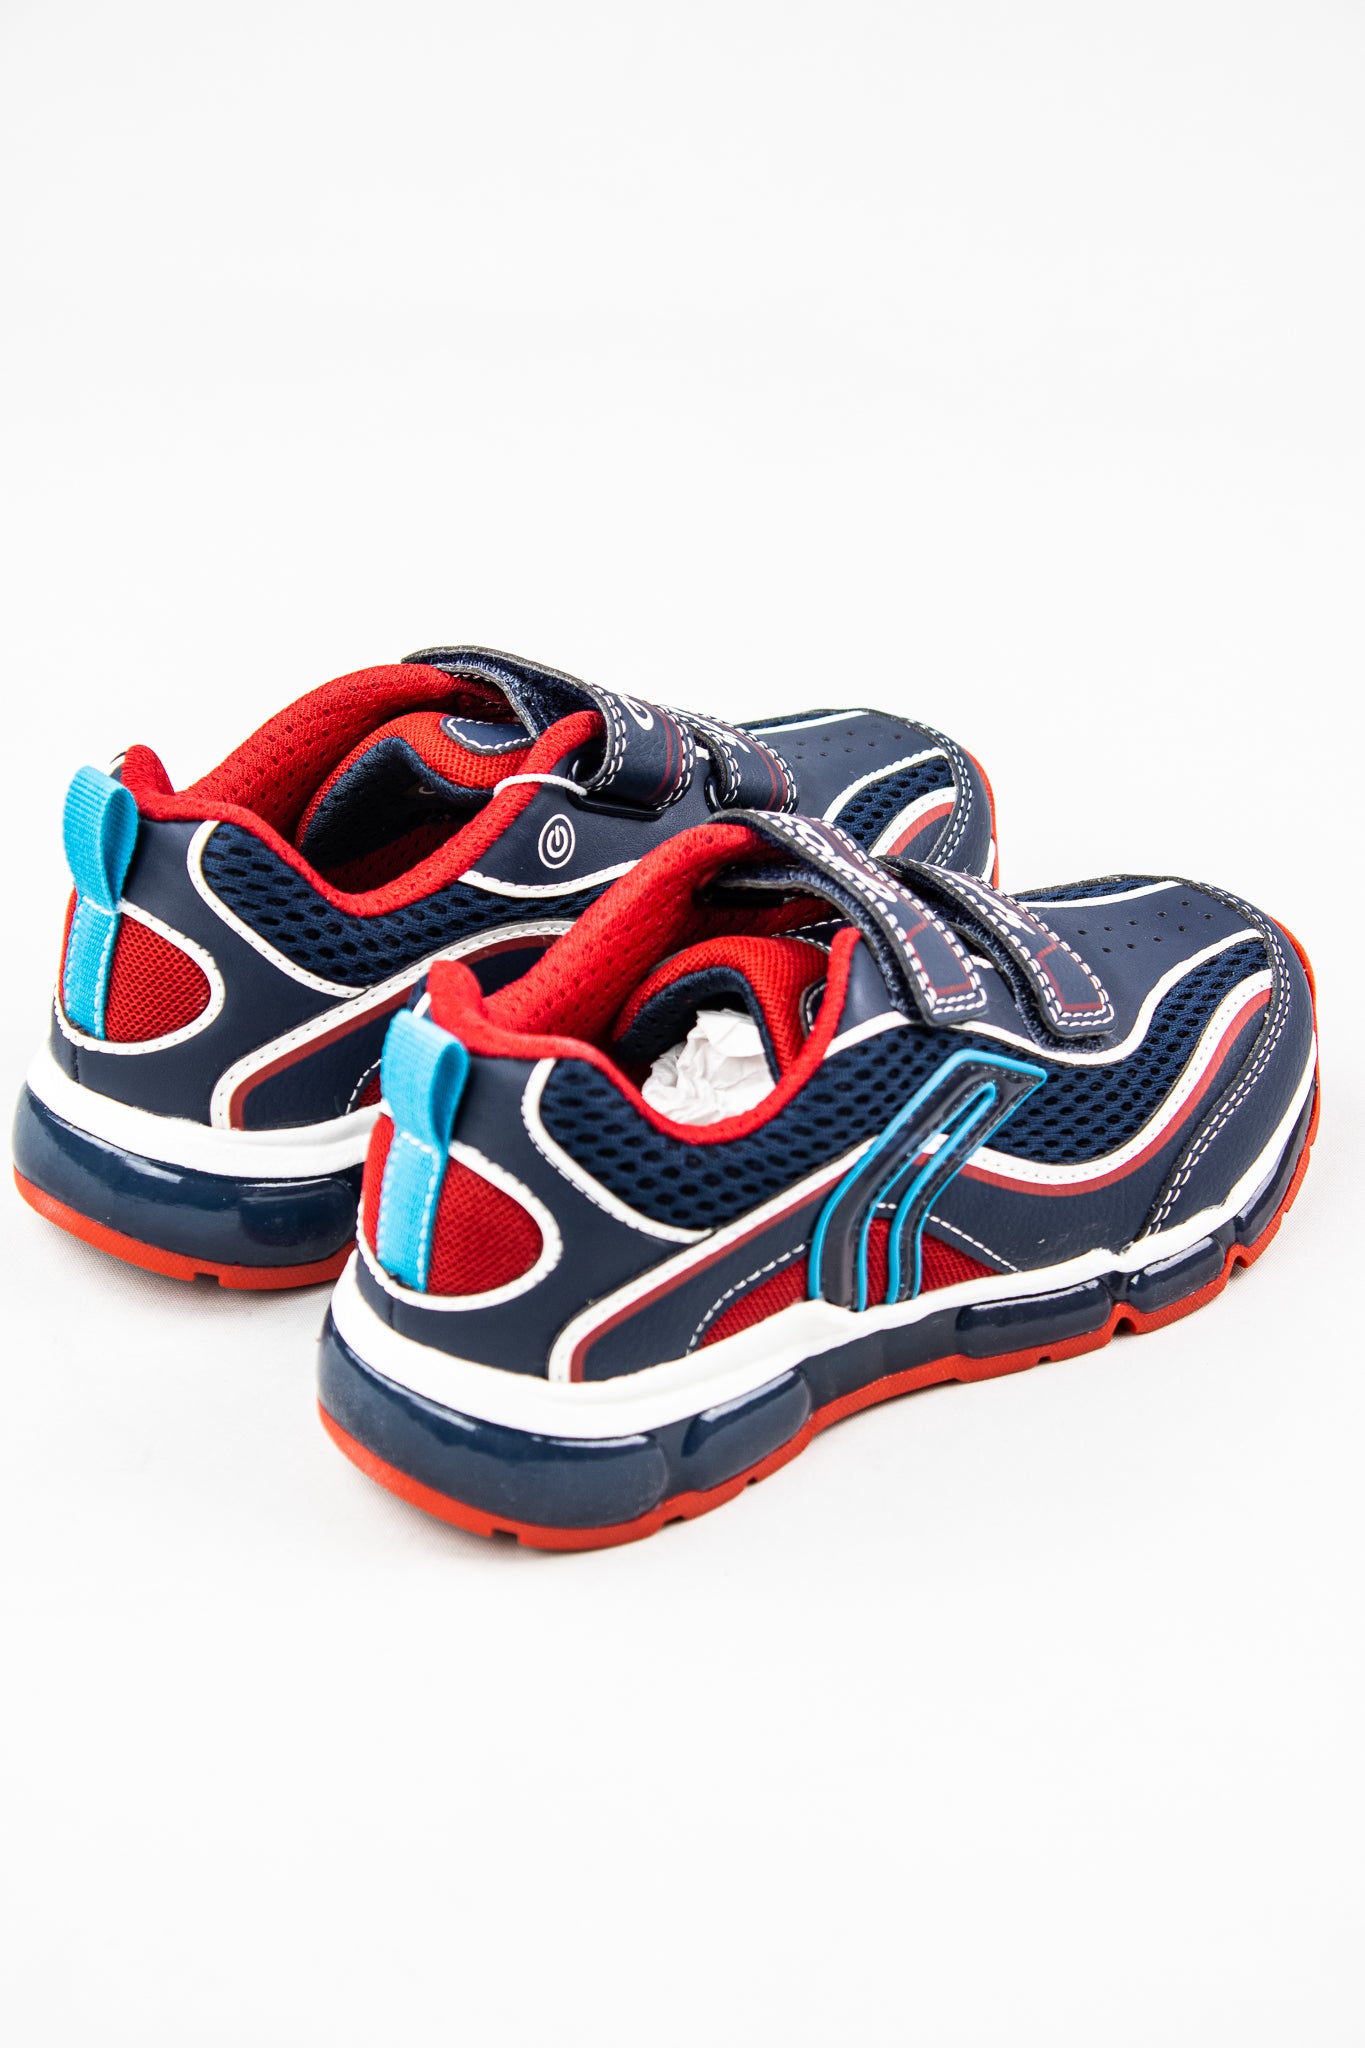 para mi Contrato Pase para saber Geox J0244C | Boys Navy & Red Runner with Lights – Donnellans